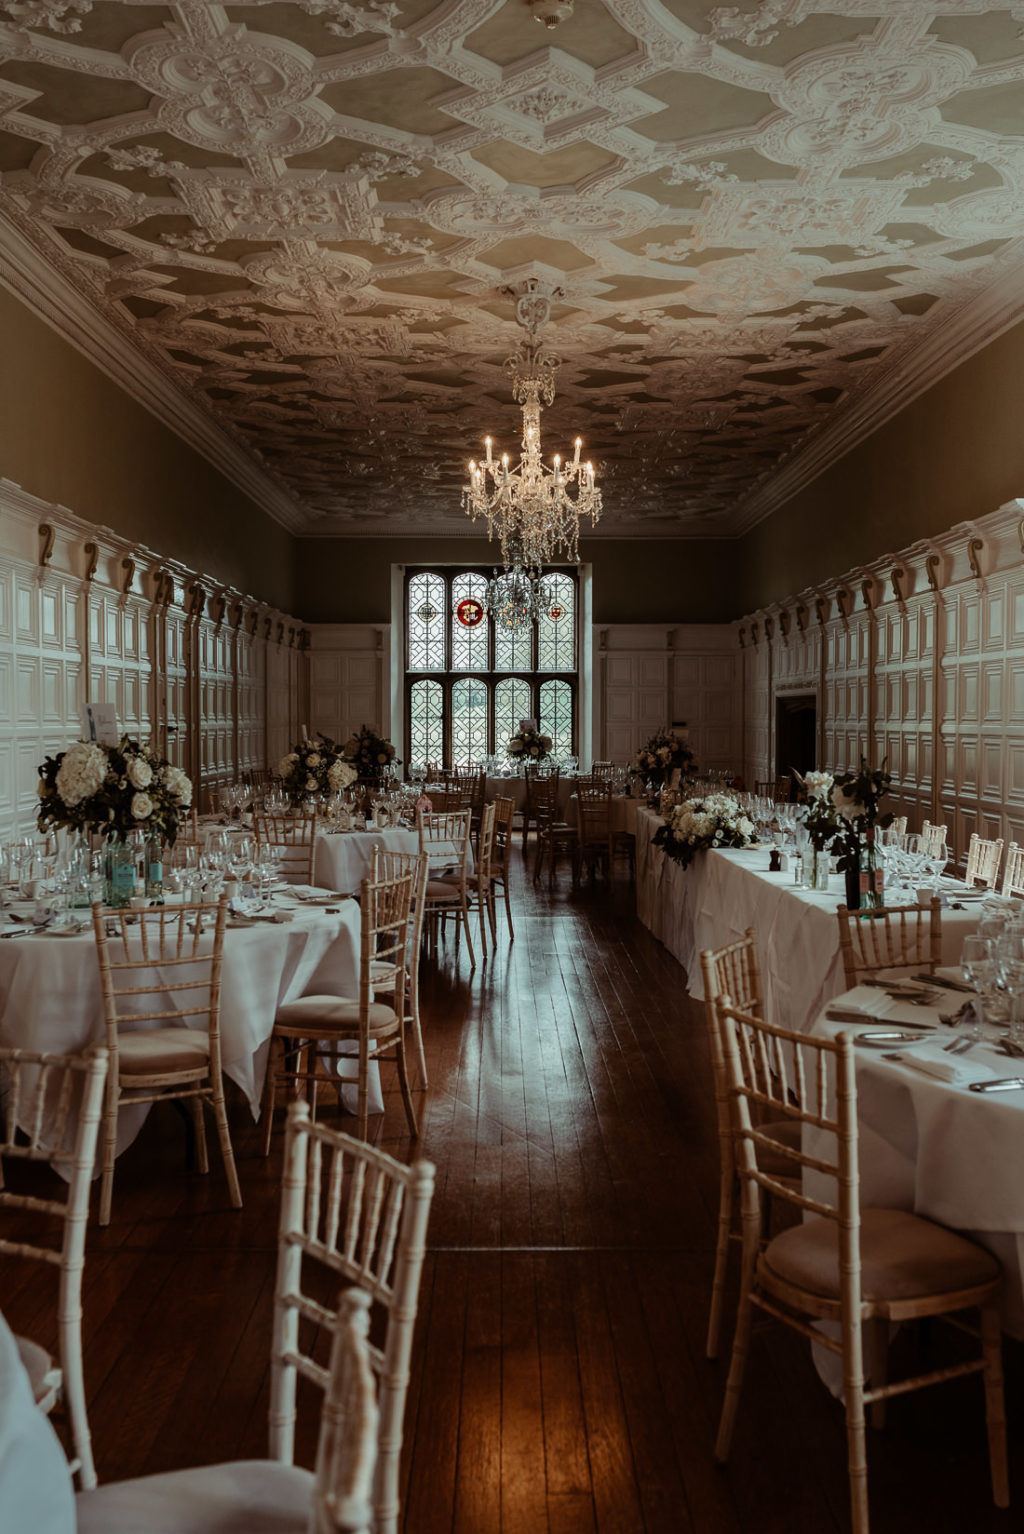 Dining room at Hengrave Hall